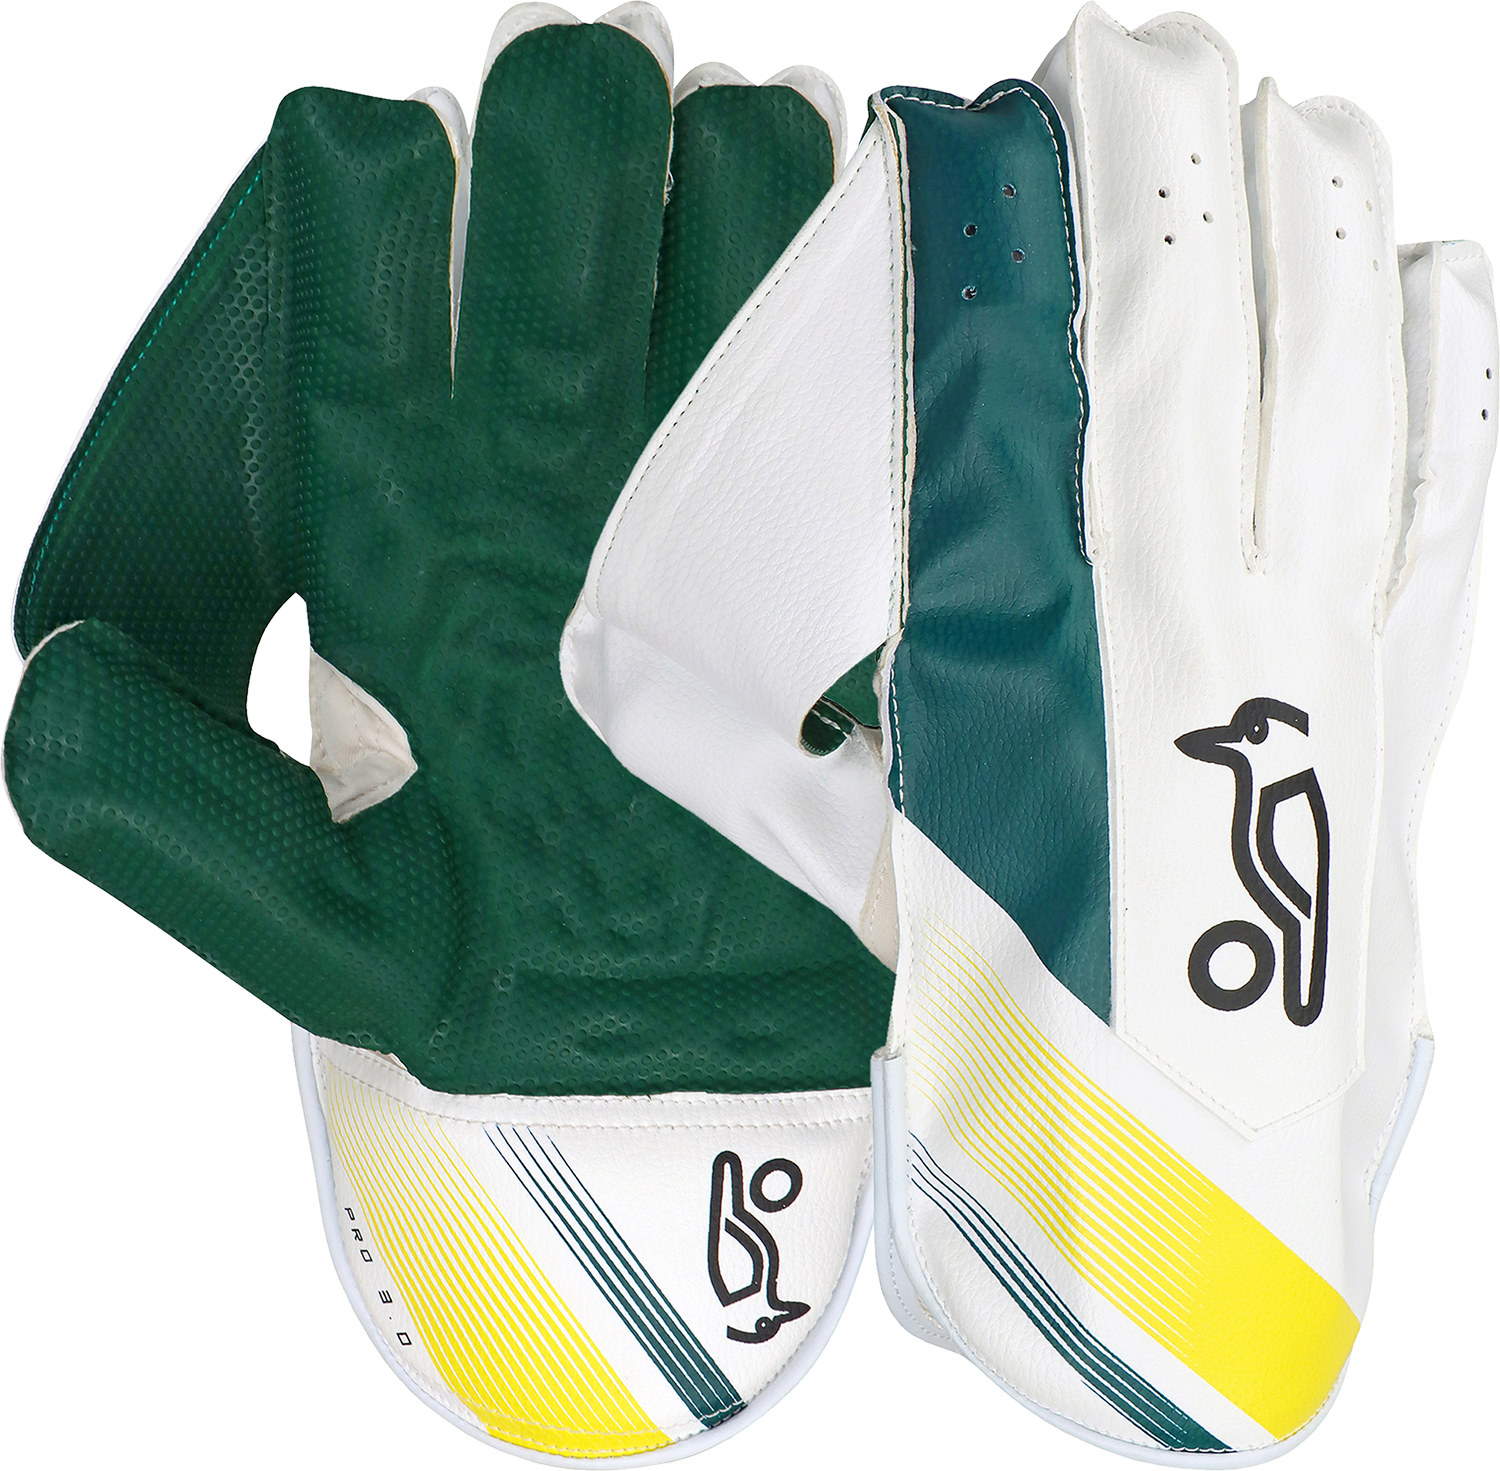 3j13103-pro-3.0-green-yellow-wicket-keeping-glove-grouped-3.png